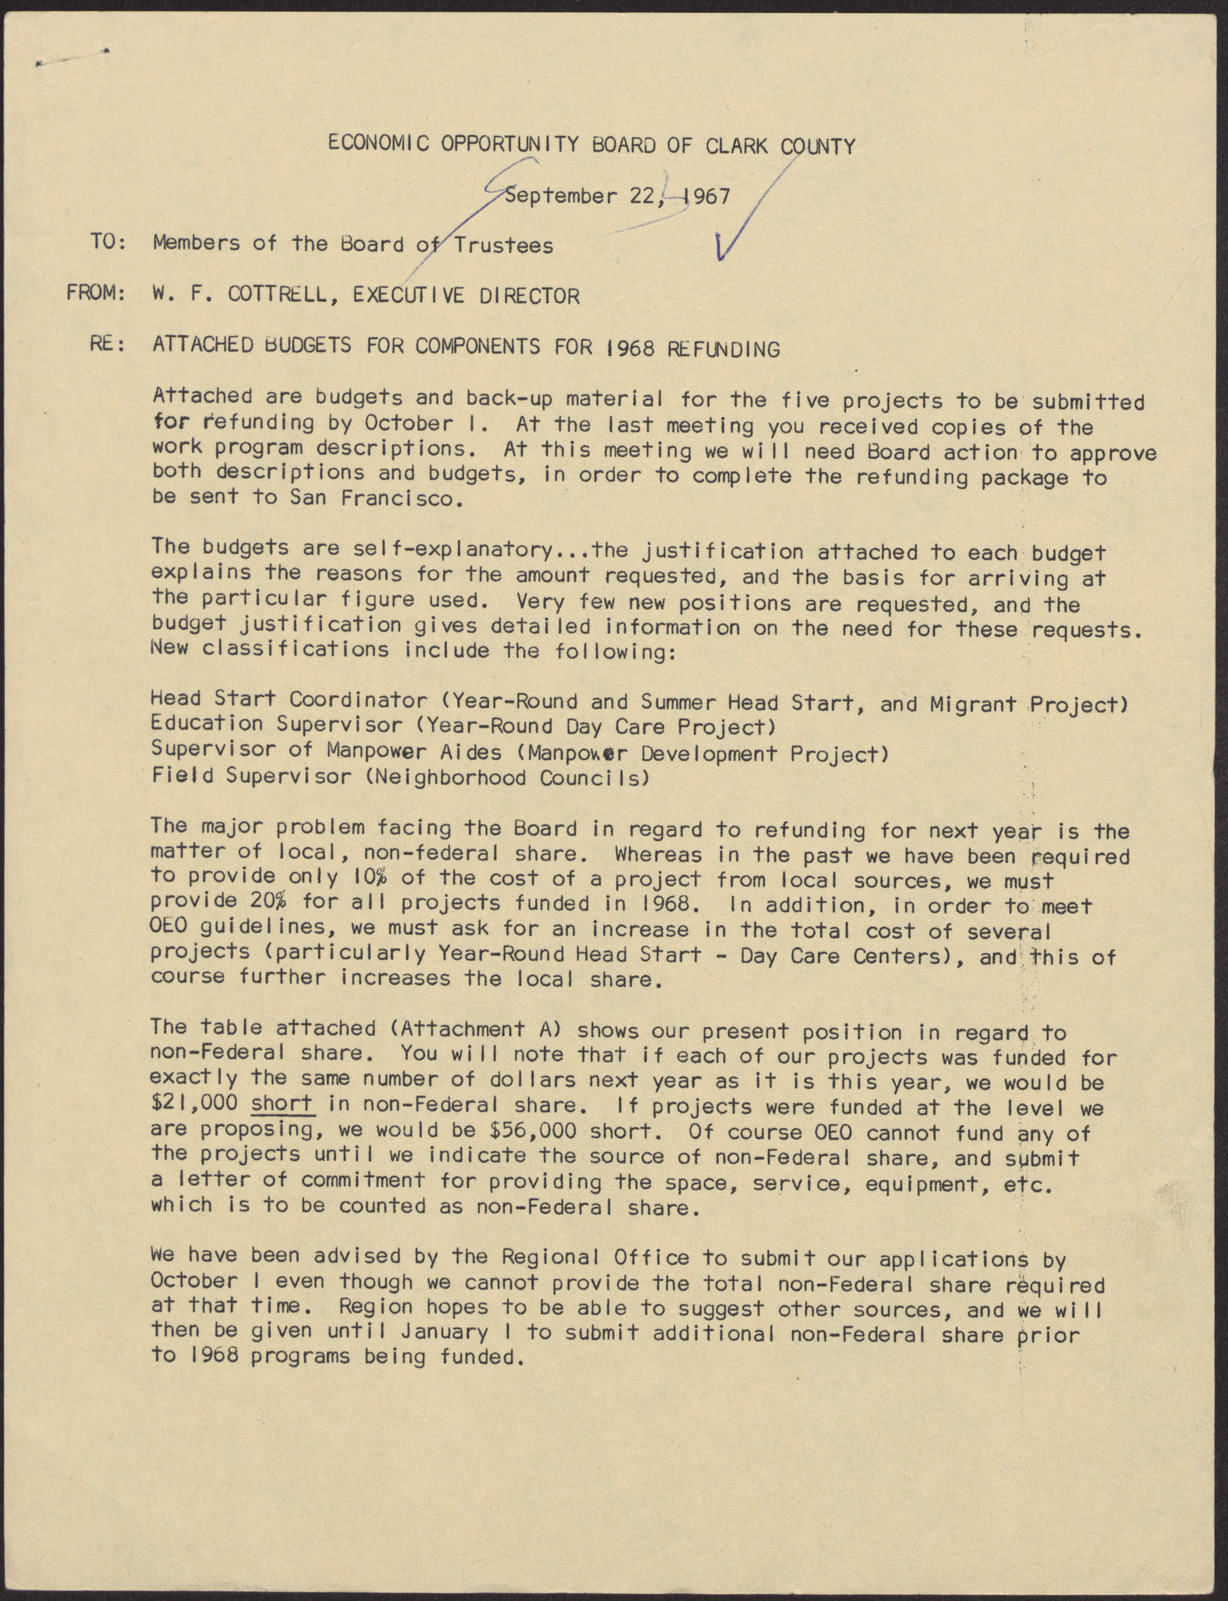 Note and attached budget for 1968 for the EOB (5 pages), September 22, 1967